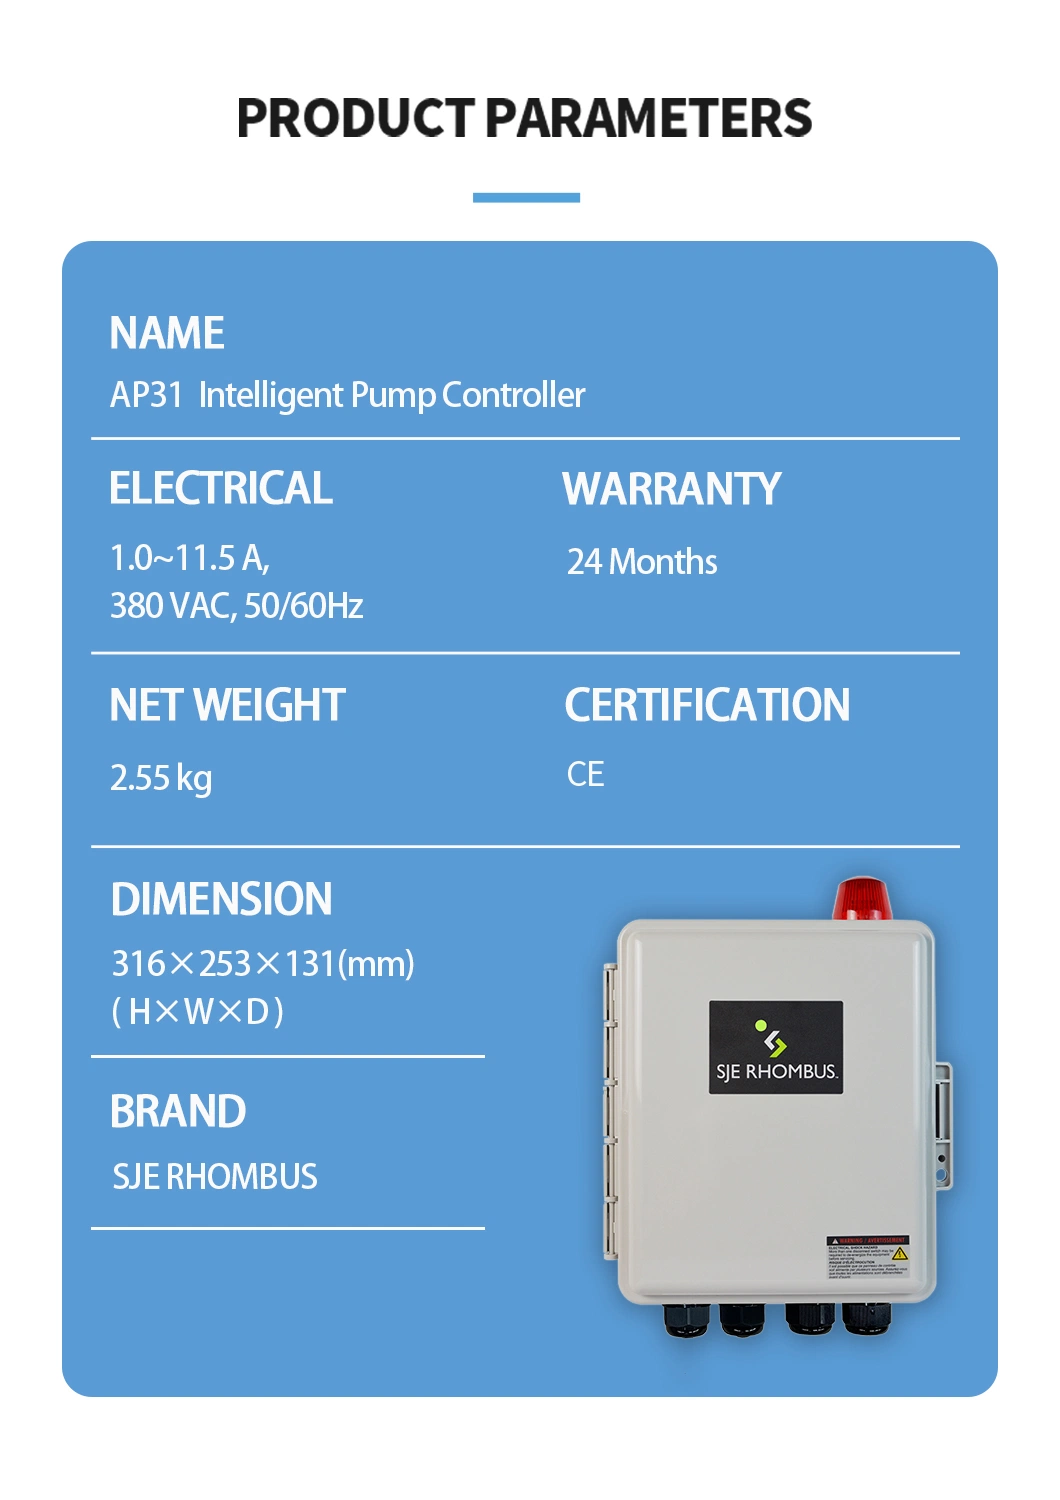 Intelligent Pump Controller for Sewage Pump Control, Three Phase Simplex, 380VAC, Full Pump Protection Function, High Level Alarm, Weekly Exerciser